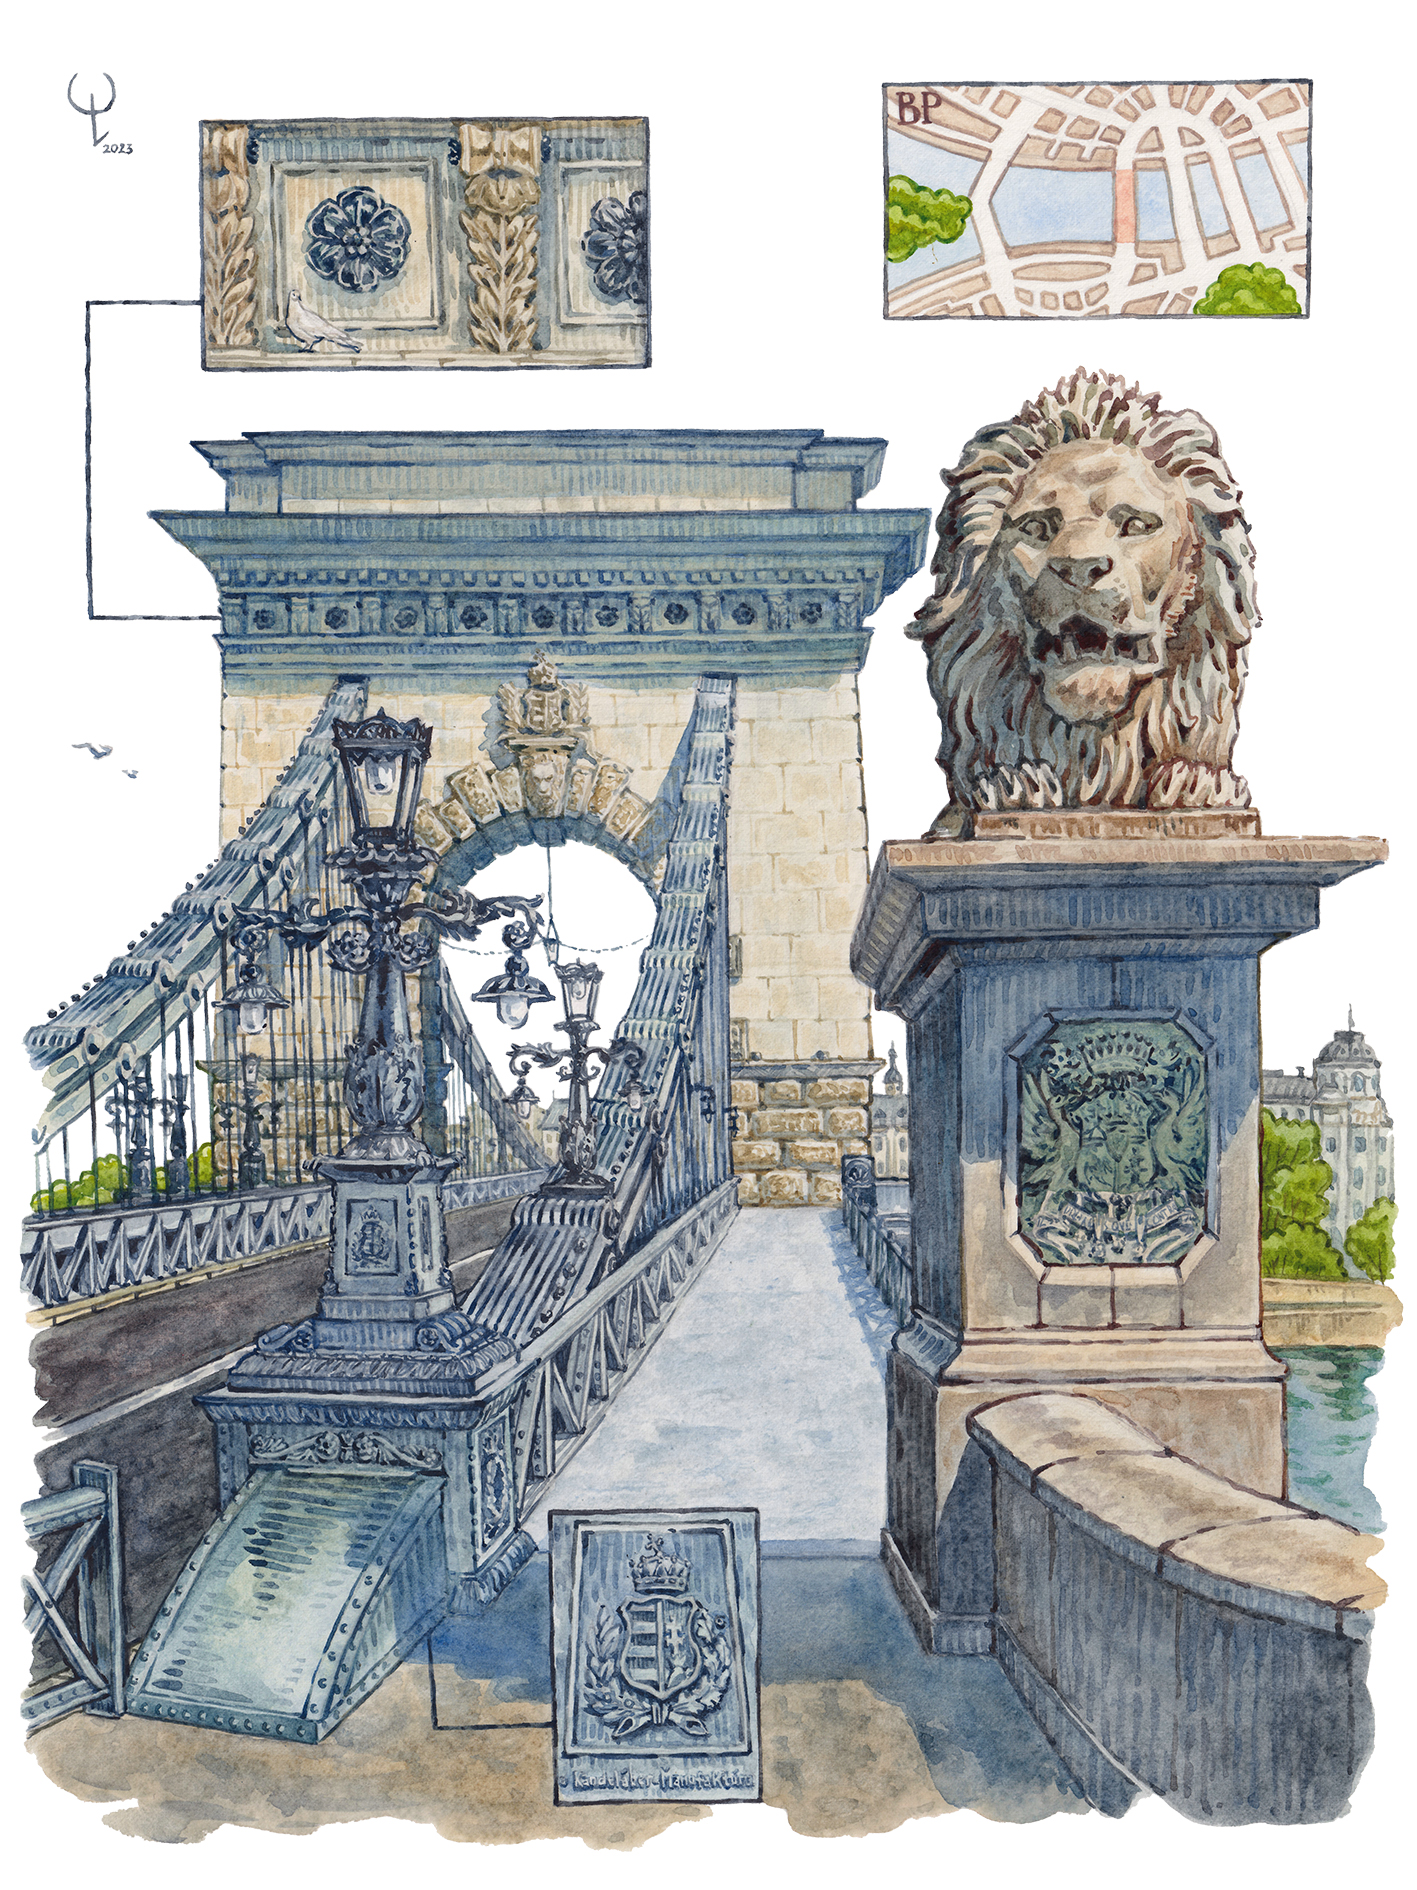 Watercolor (watercolour) painting of Chain bridge in Budapest.